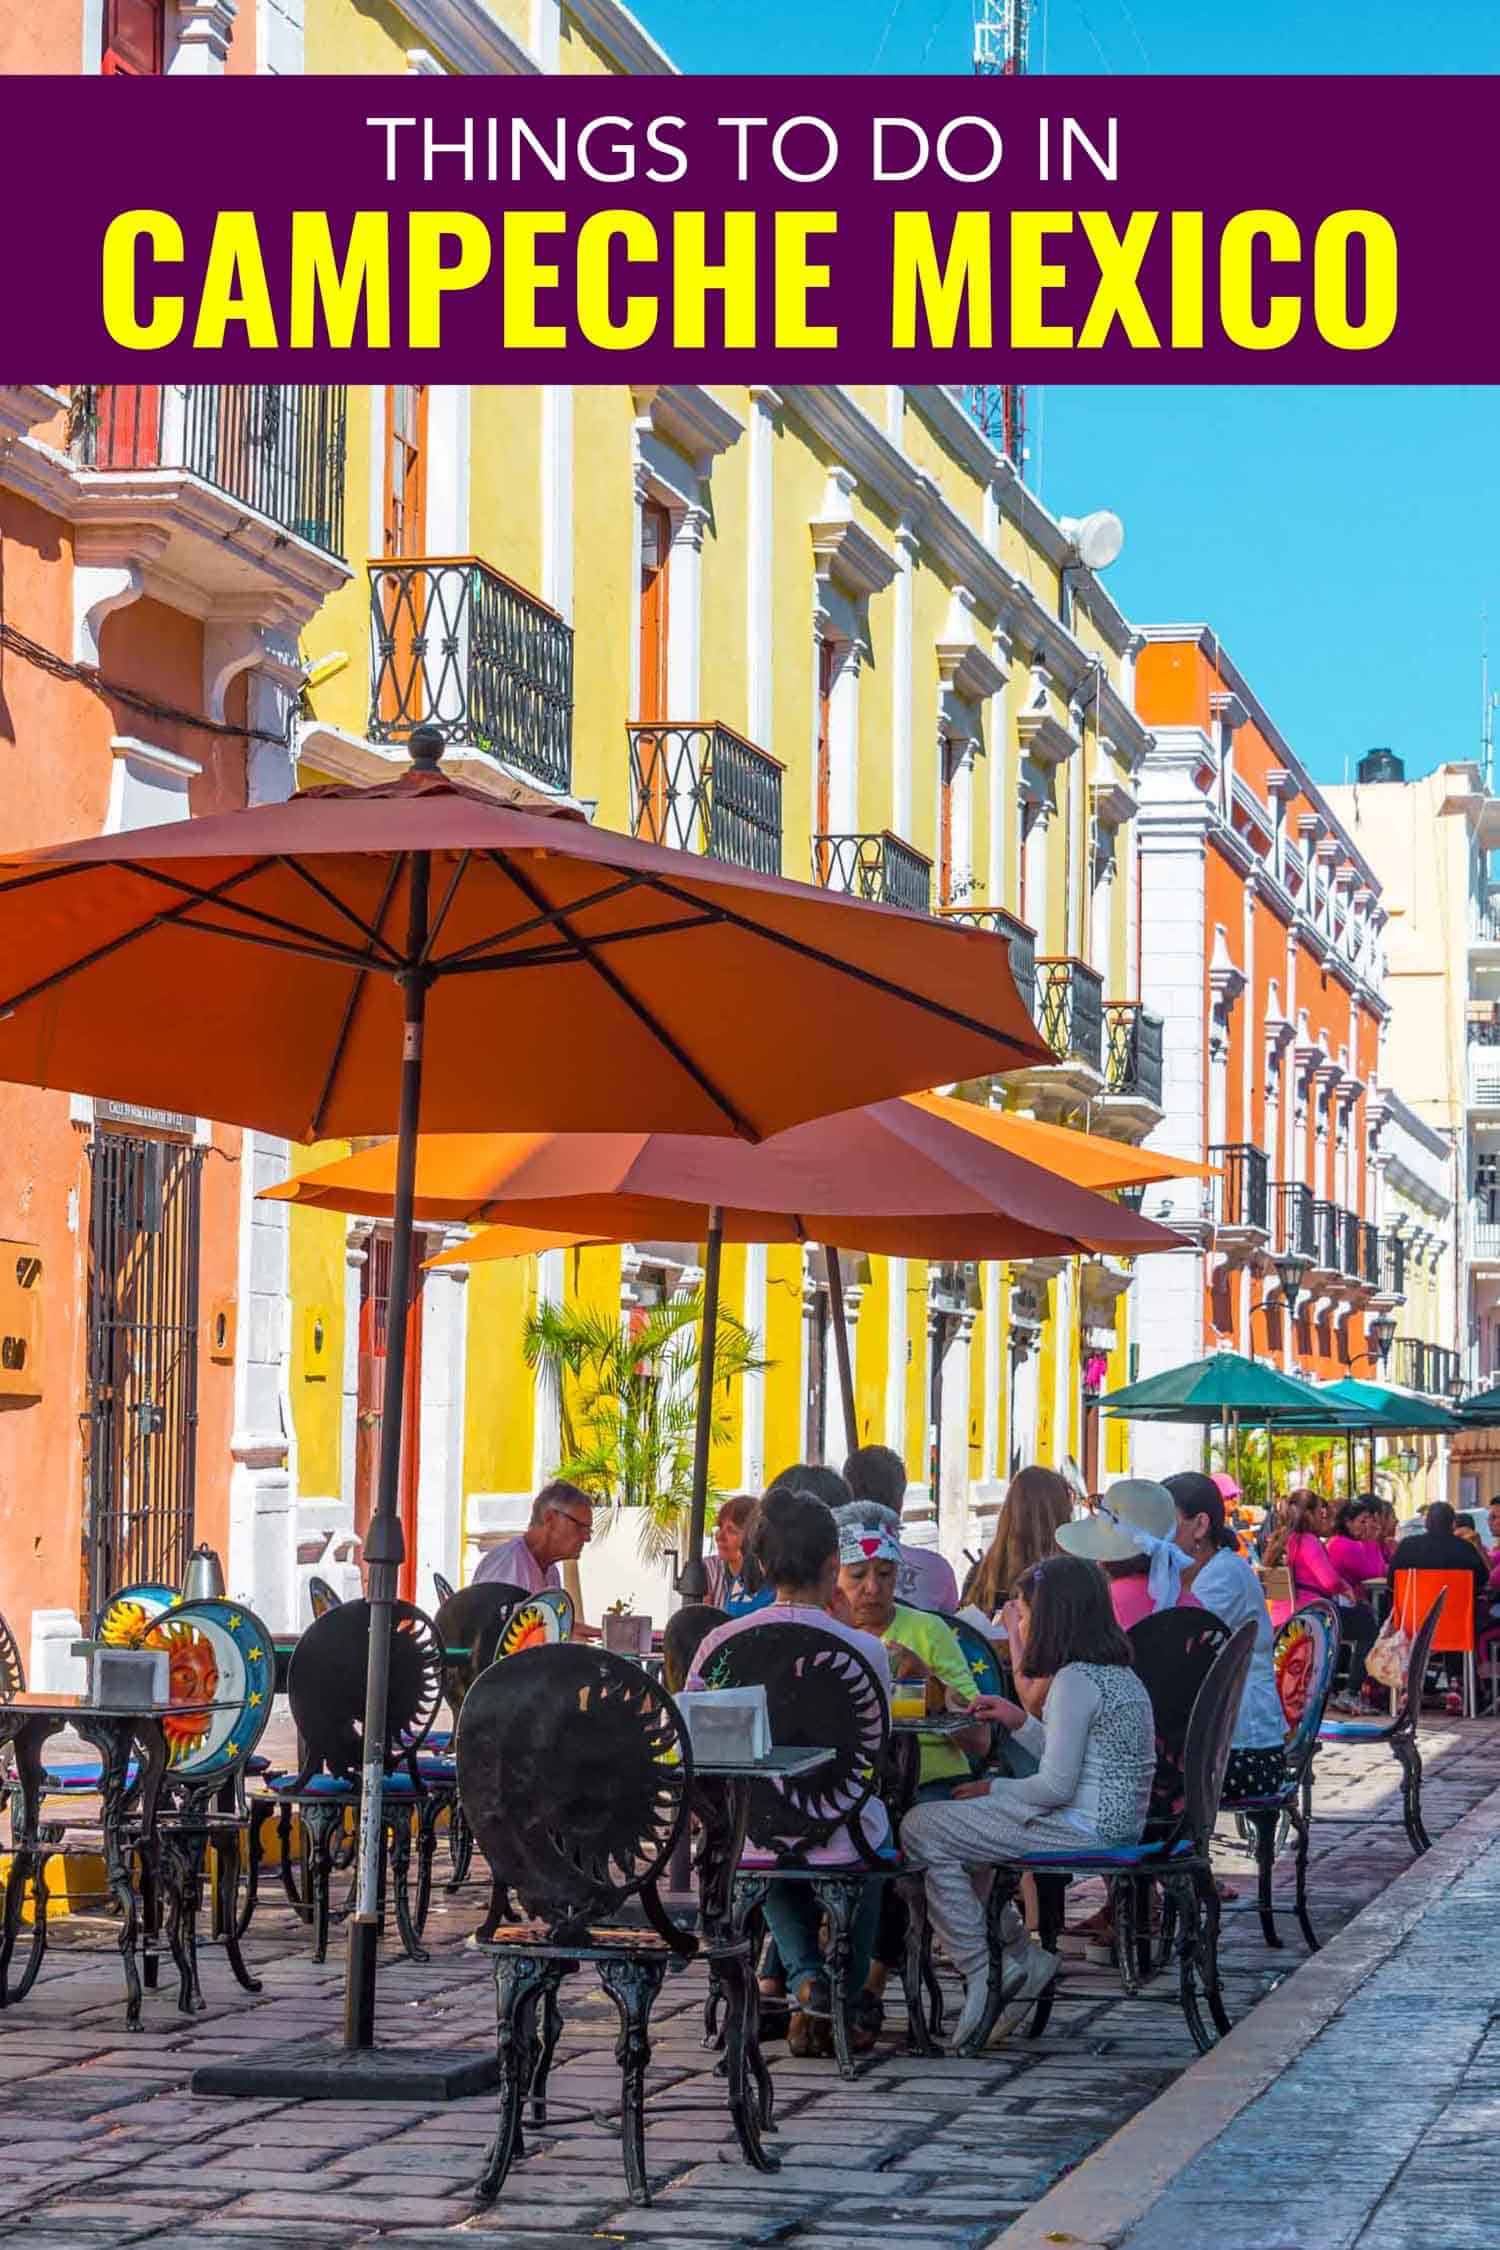 Campeche Mexico pedestrian street with restaurants and cafes